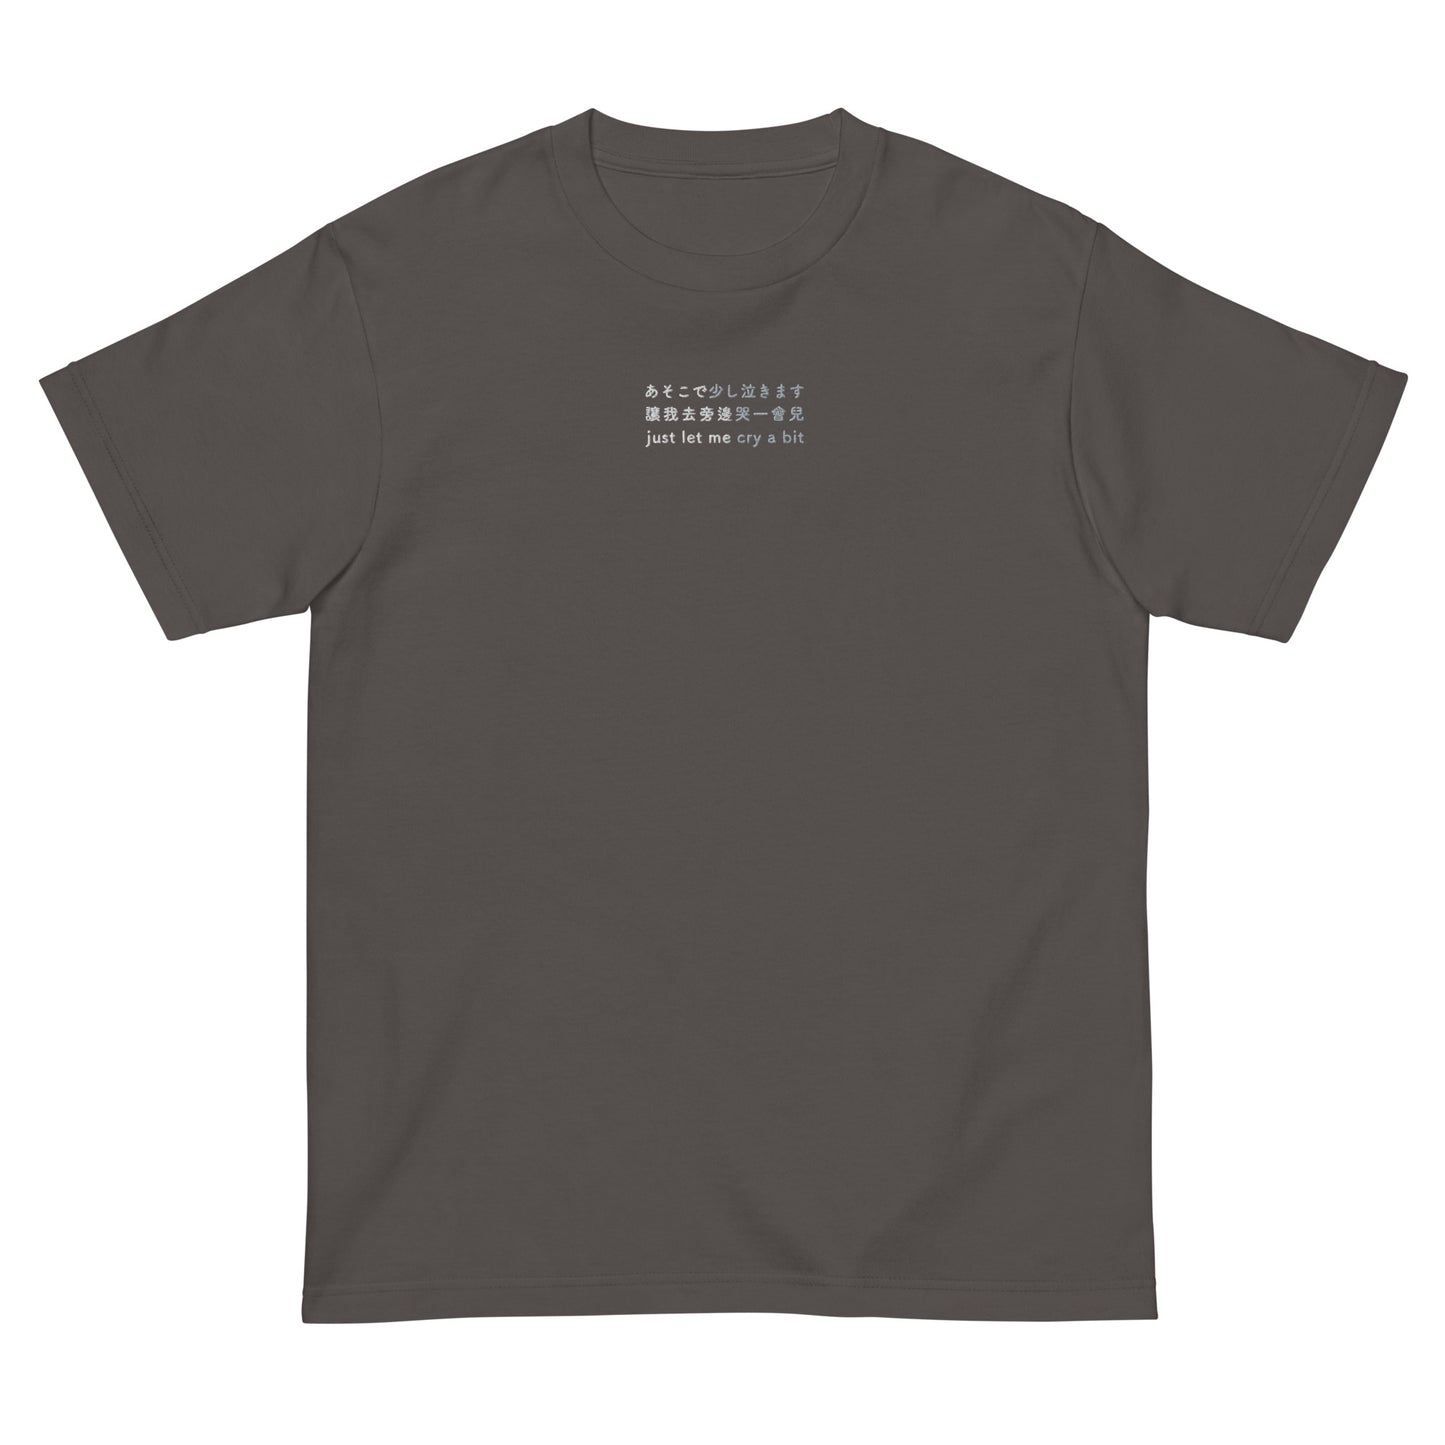 Dark Gray High Quality Tee - Front Design with an White,Light Gray Embroidery "Just Let Me Cry A Bit" in Japanese,Chinese and English